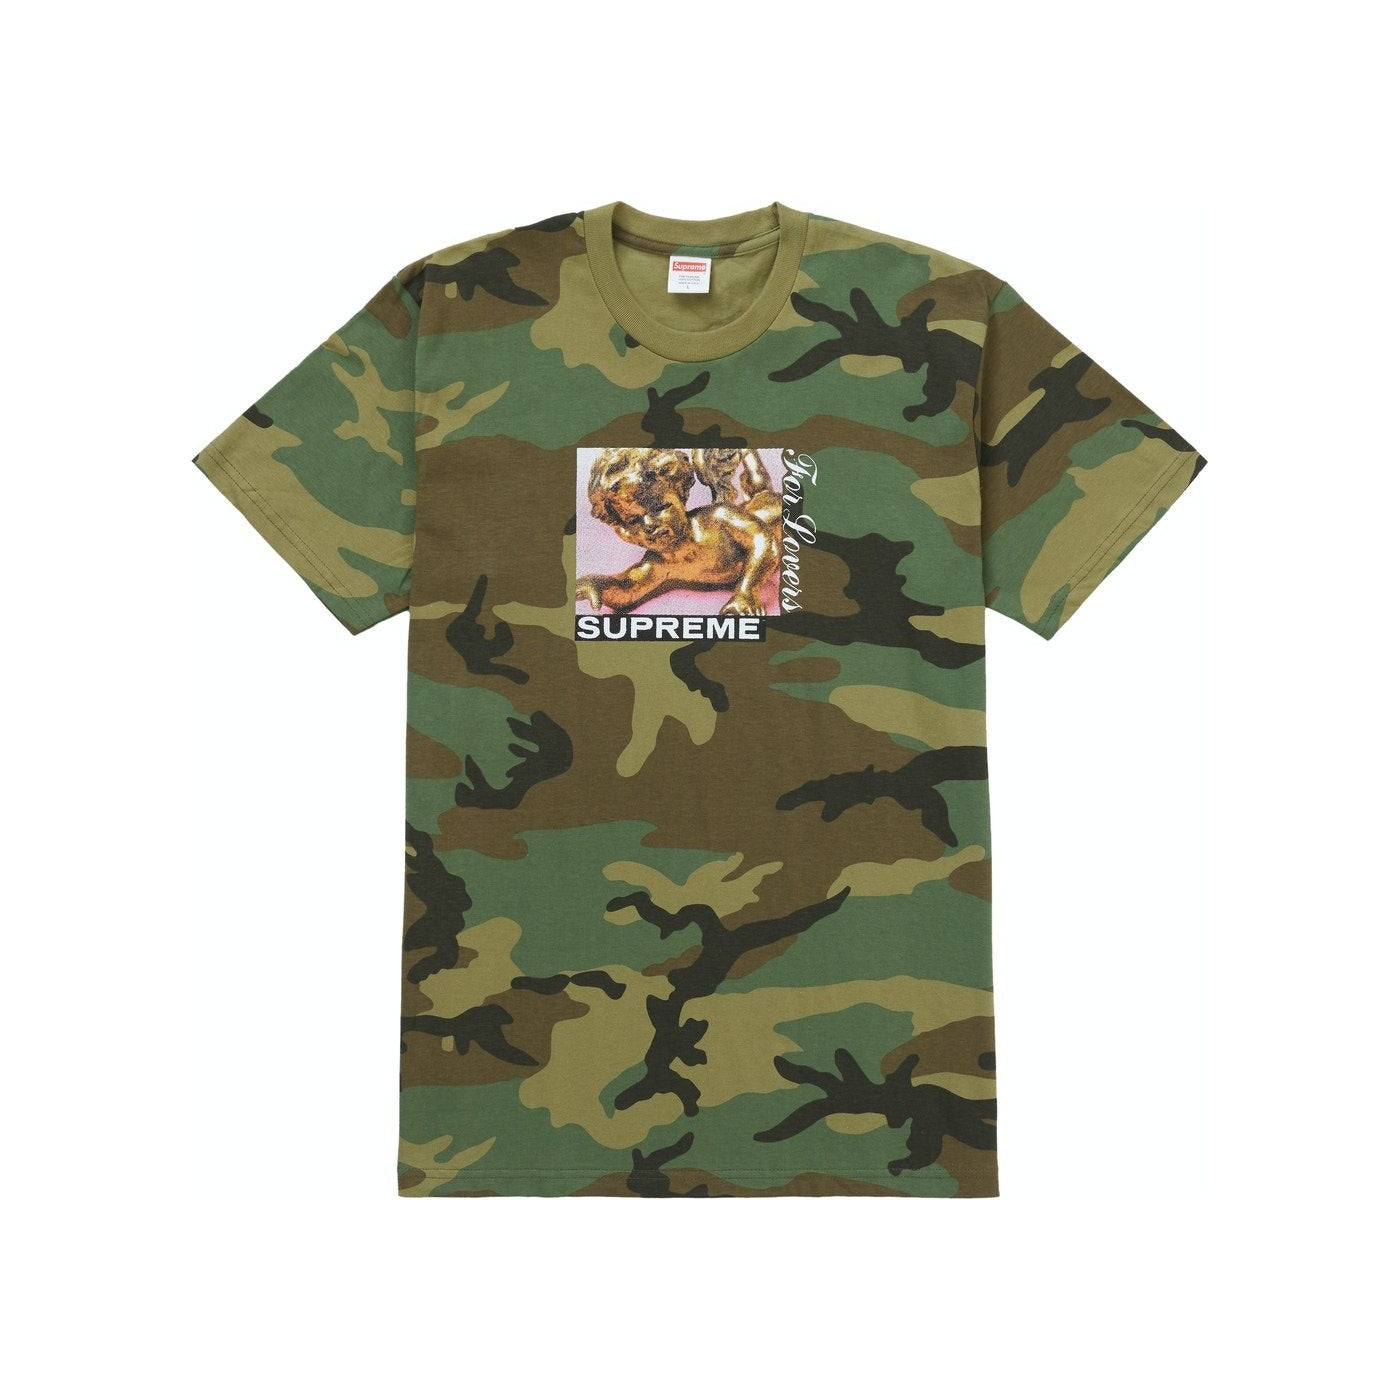 Supreme Lovers Tee Wood land camo - Centrall Online